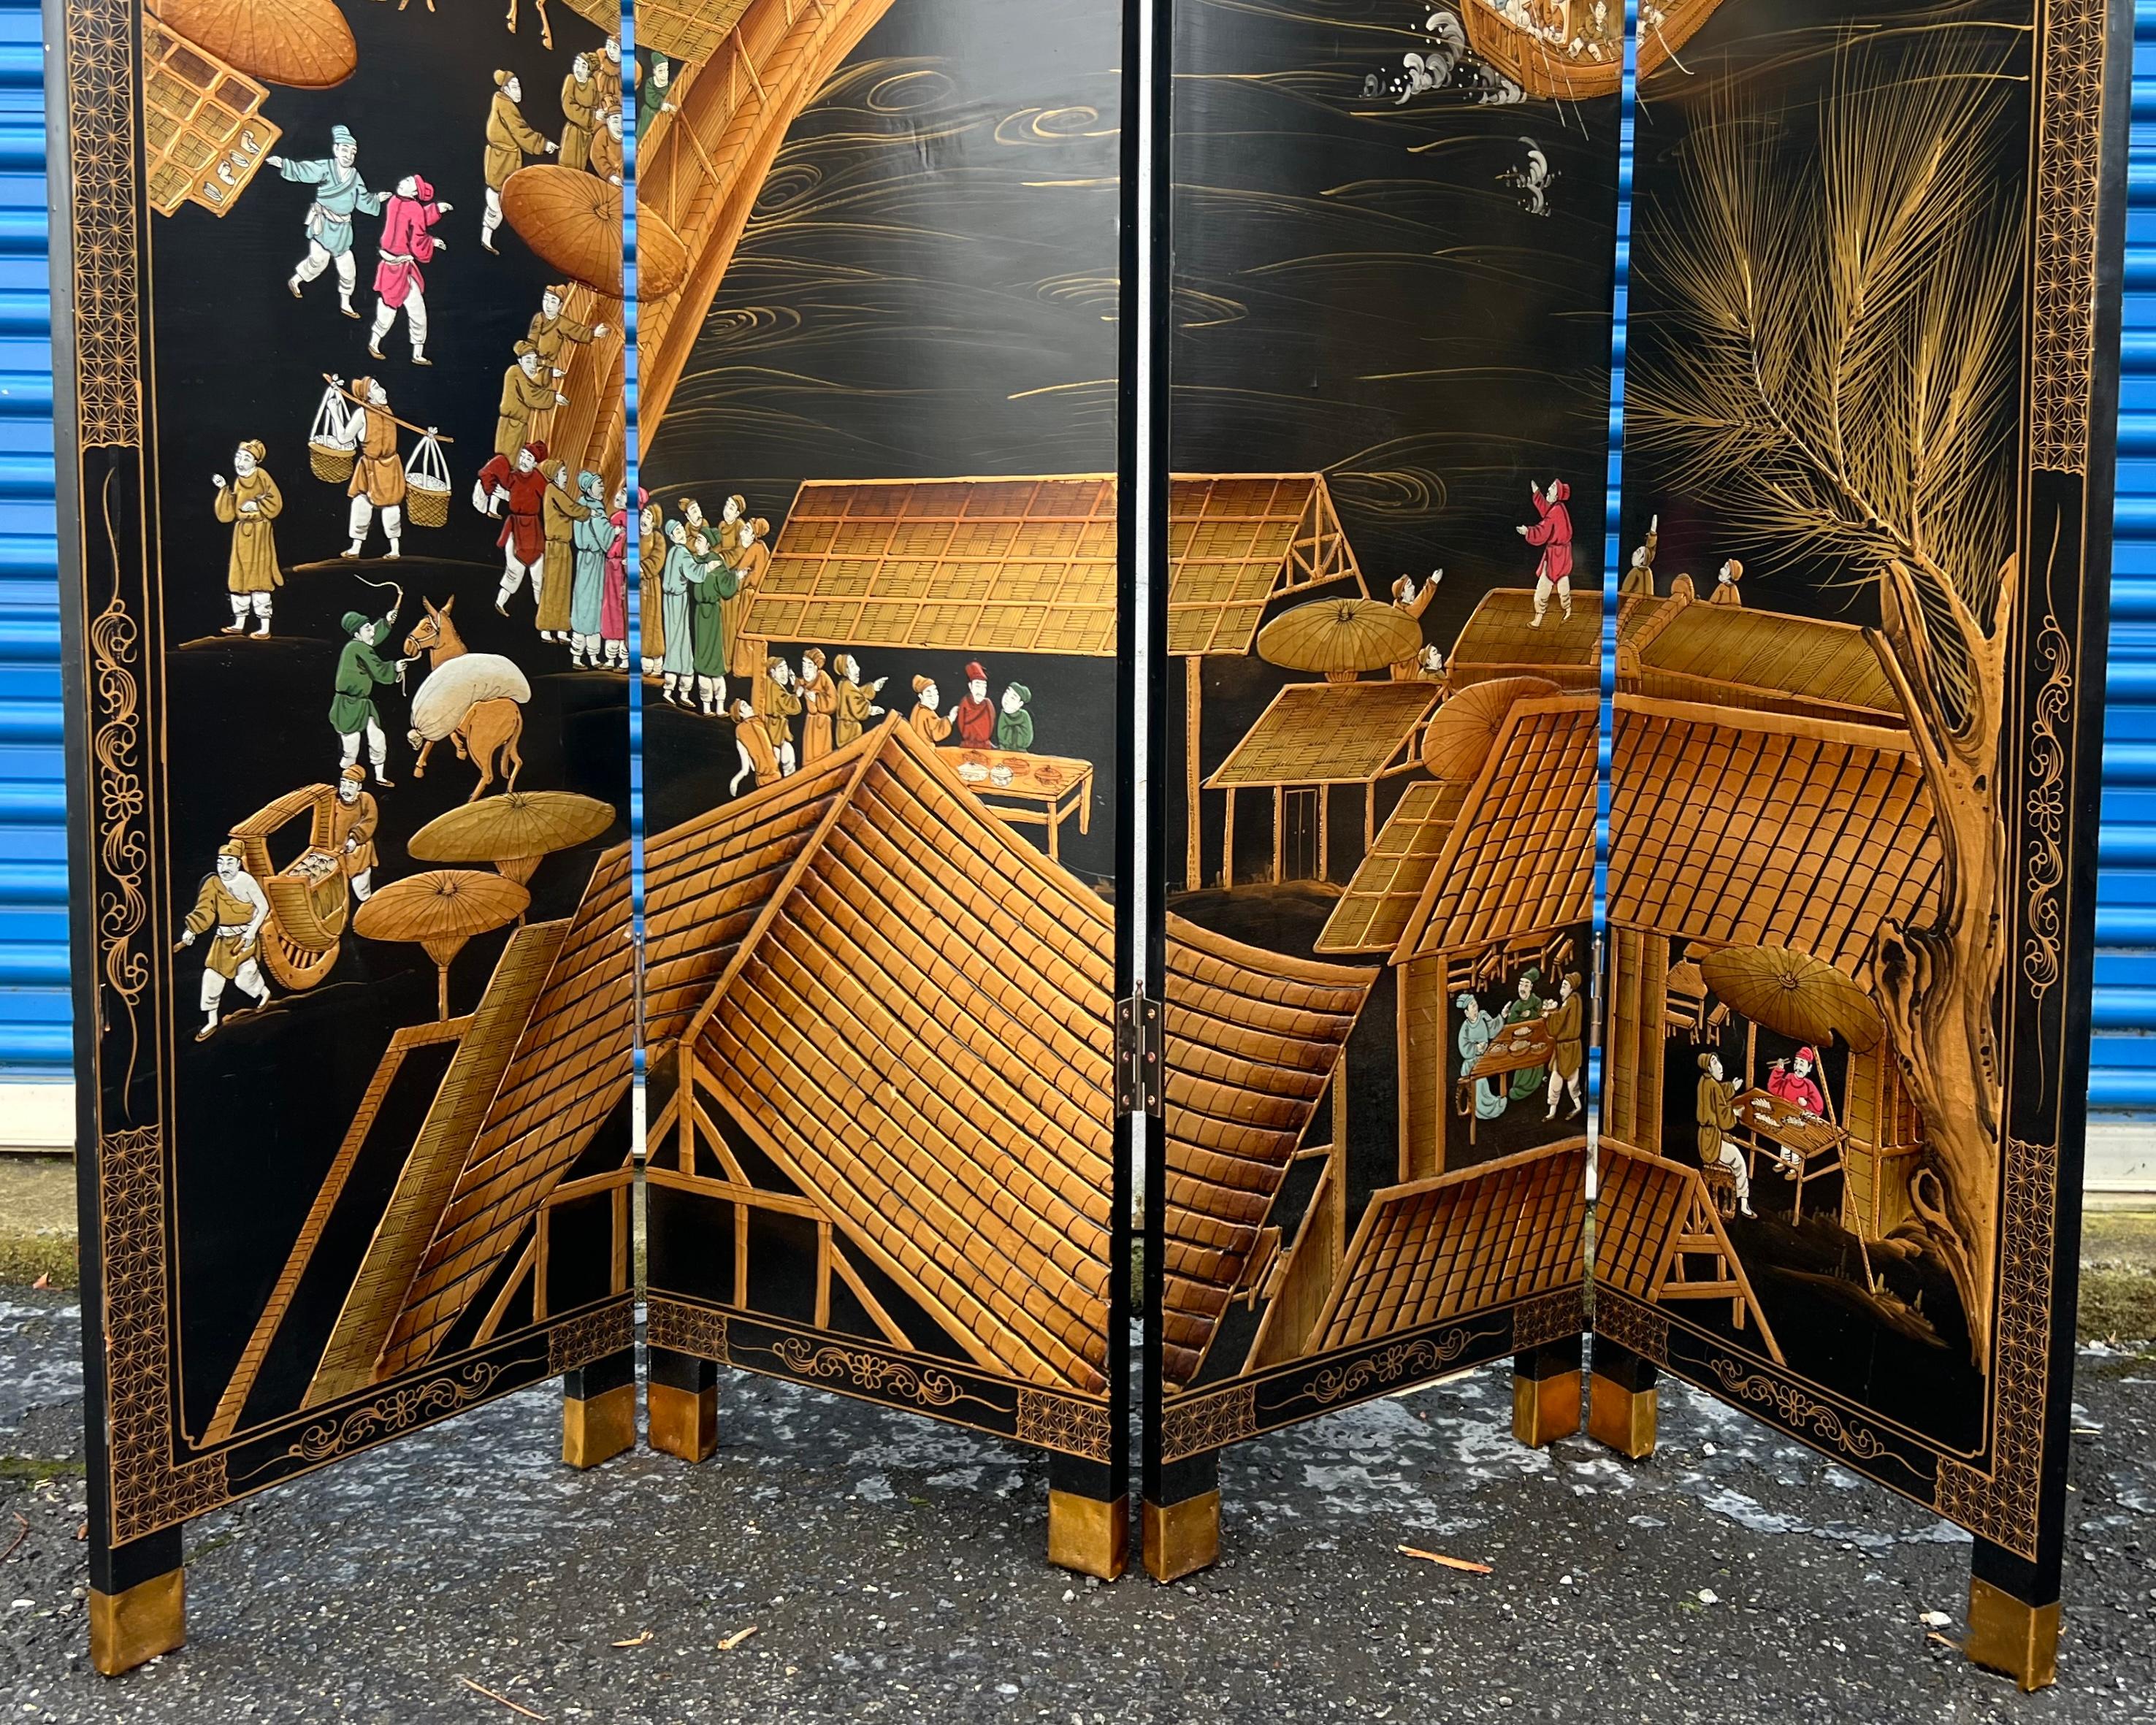 Chinoiserie Black Lacquer Screen Att. Decorative Crafts, 4 Panel Wall Art In Good Condition For Sale In Kennesaw, GA